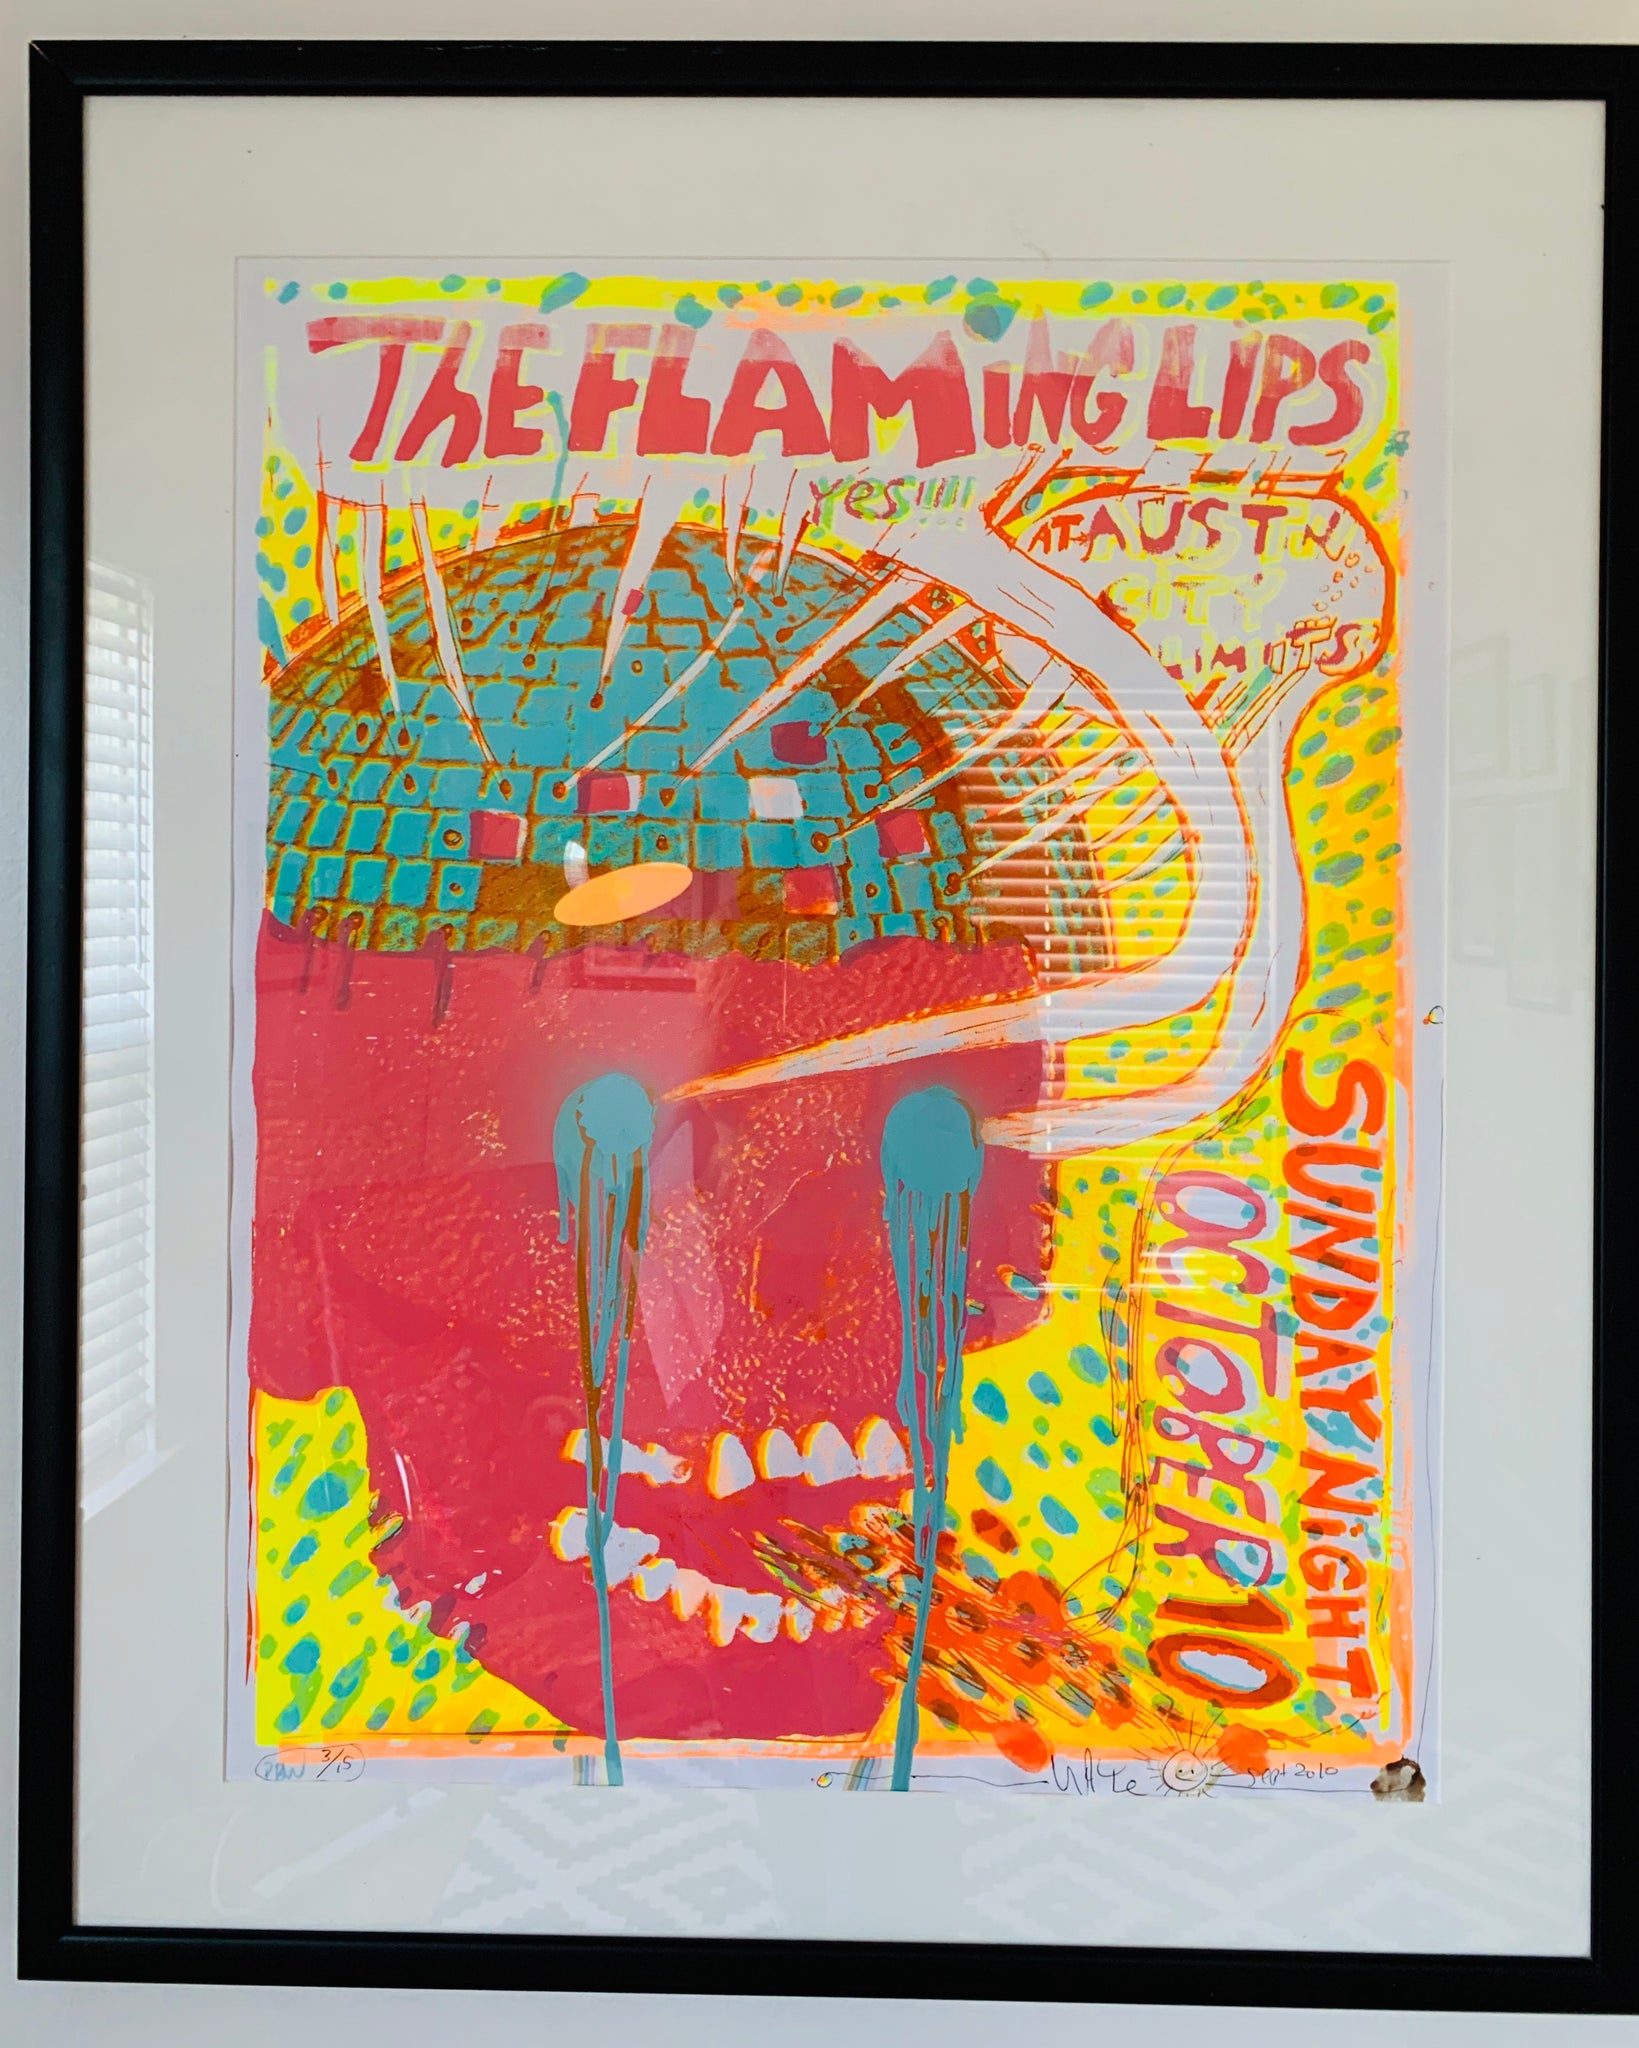 Limited Flaming Lips at Austin City Limits poster